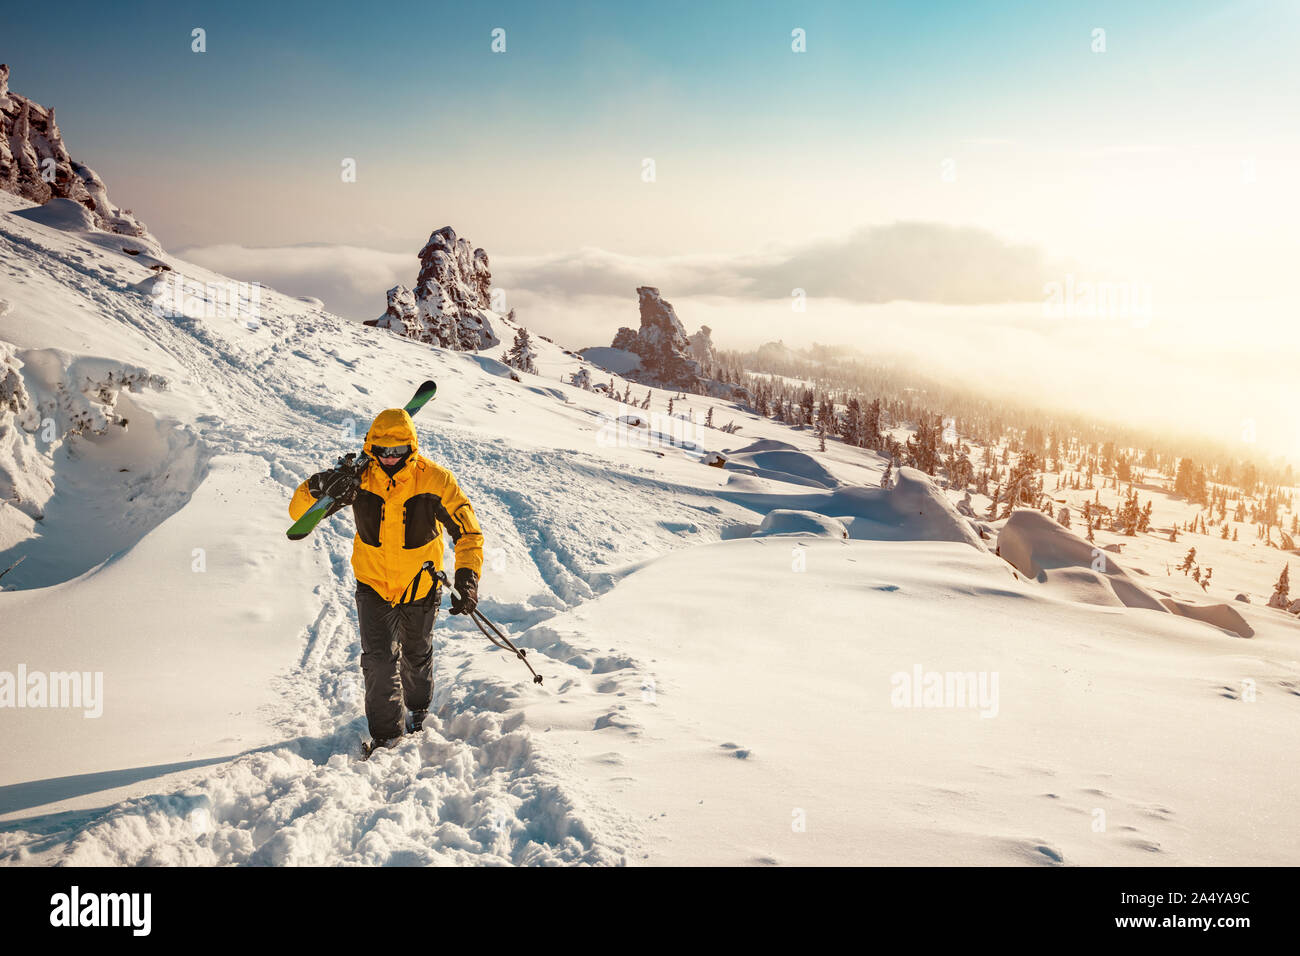 Ski tour concept with skier going uphill for backcountry freeride Stock Photo